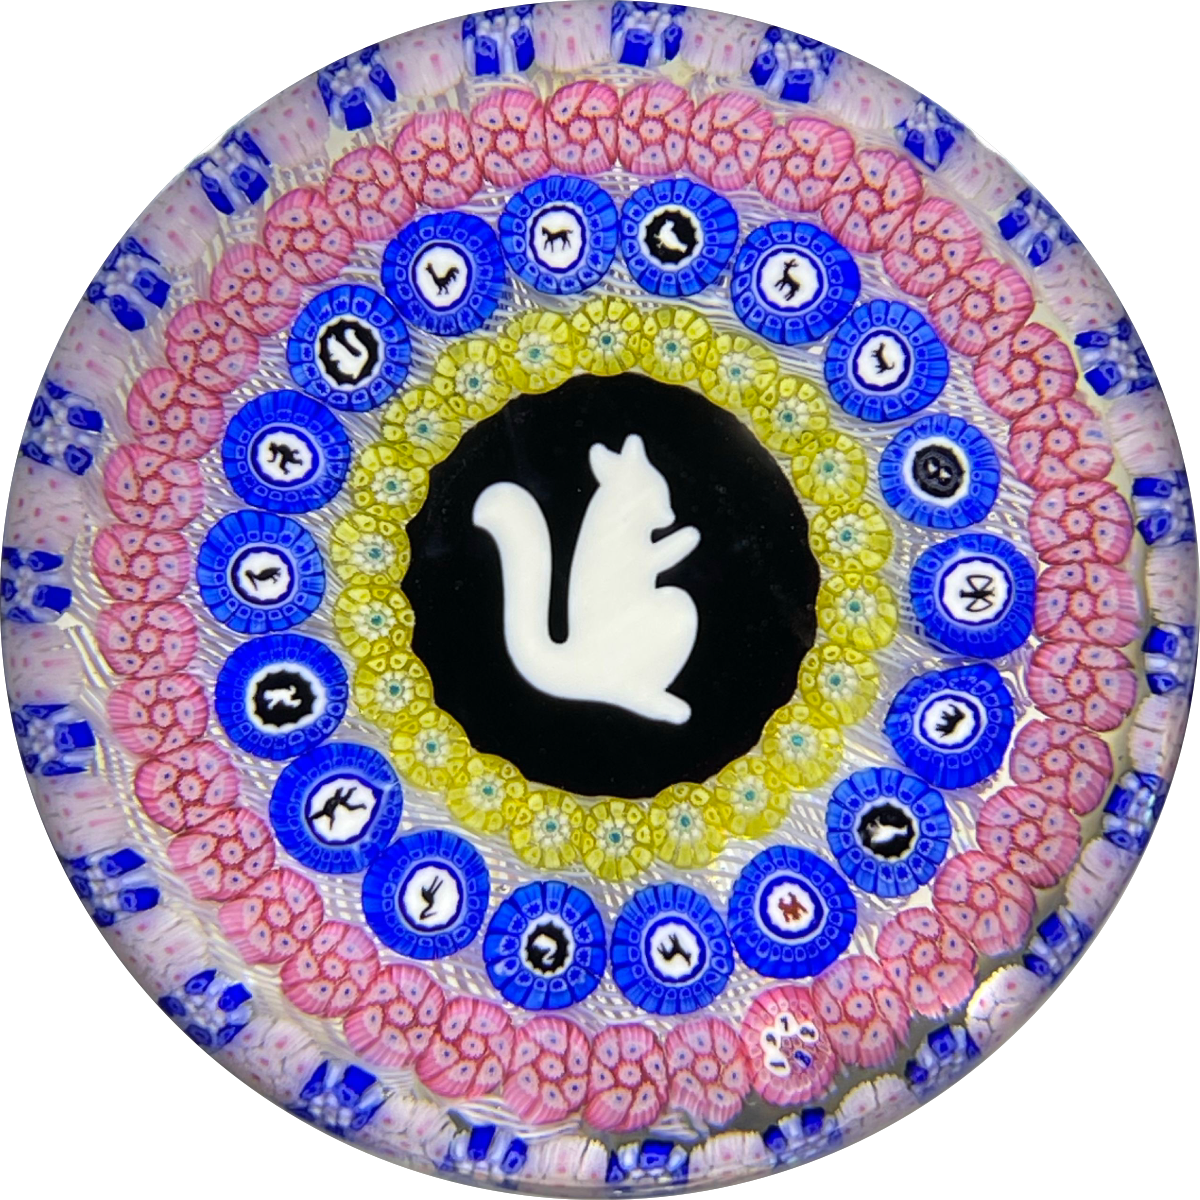 Baccarat Crystal 1972 LE Écureuil Blanc Gridel White Squirrel Murrine With 18 Concentric Silhouette Canes & Complex Millefiori on Upset White Muslin Lace